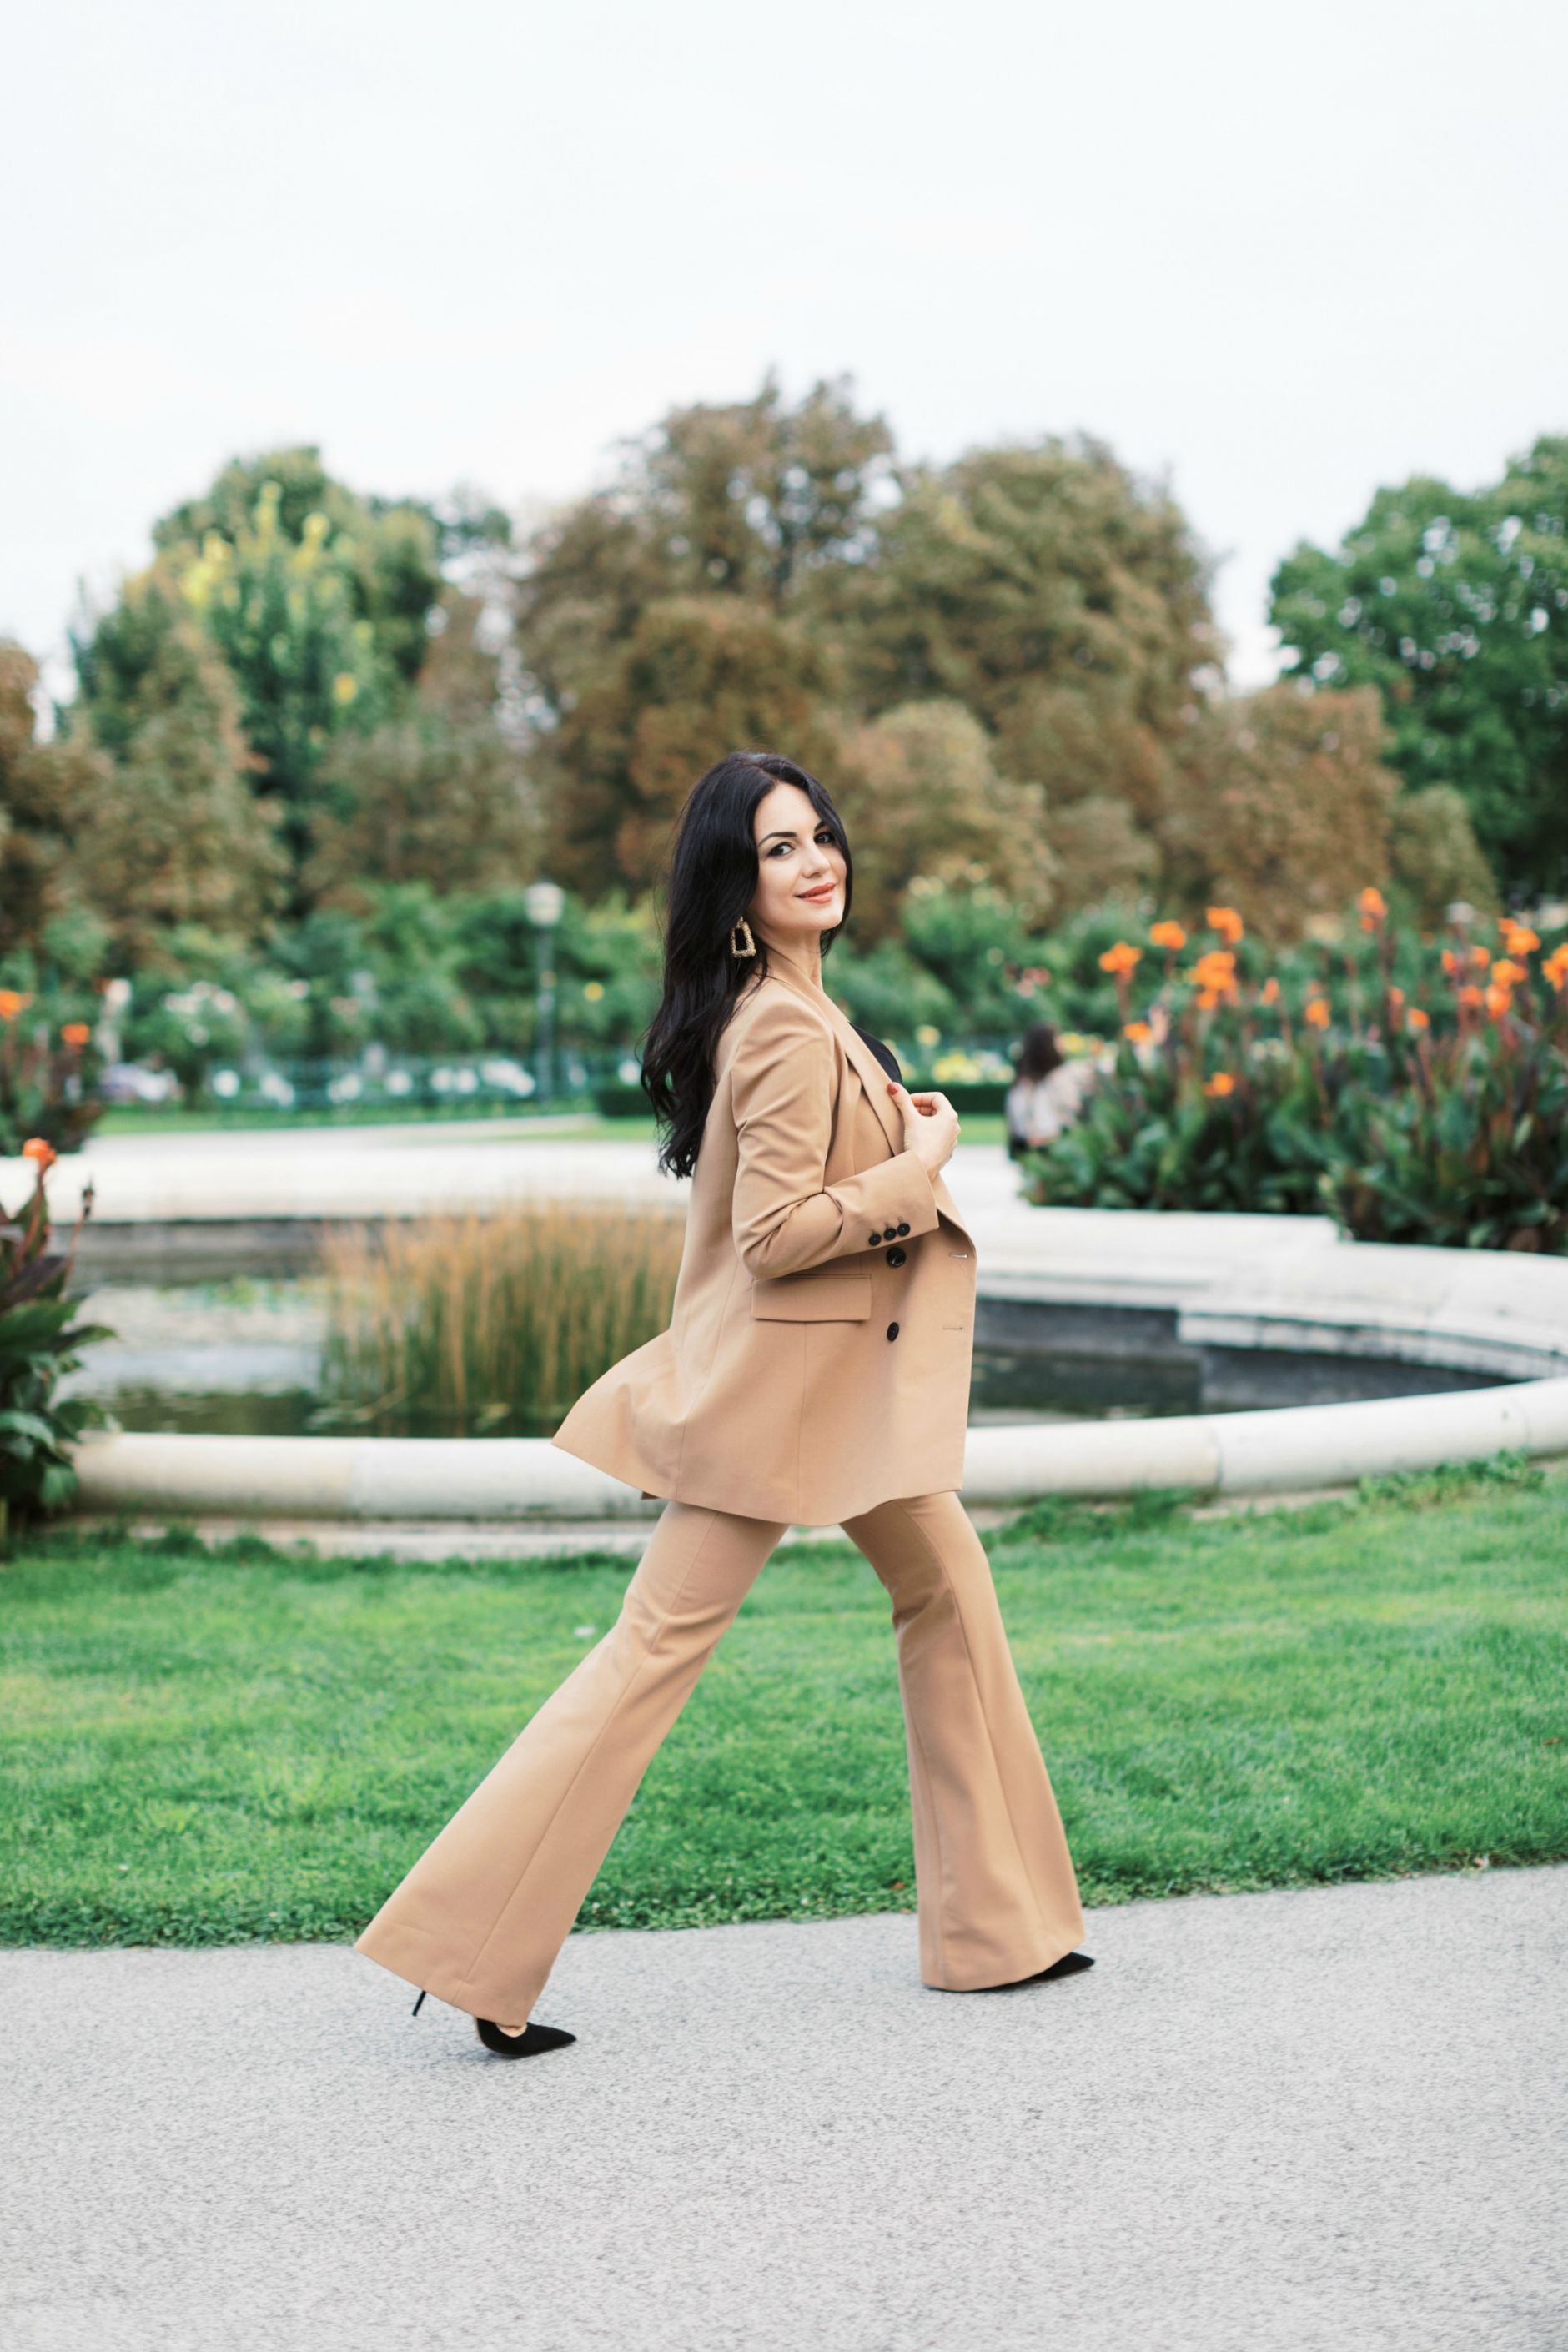 BROWN IS THE NEW BLACK – THE POWER SUIT